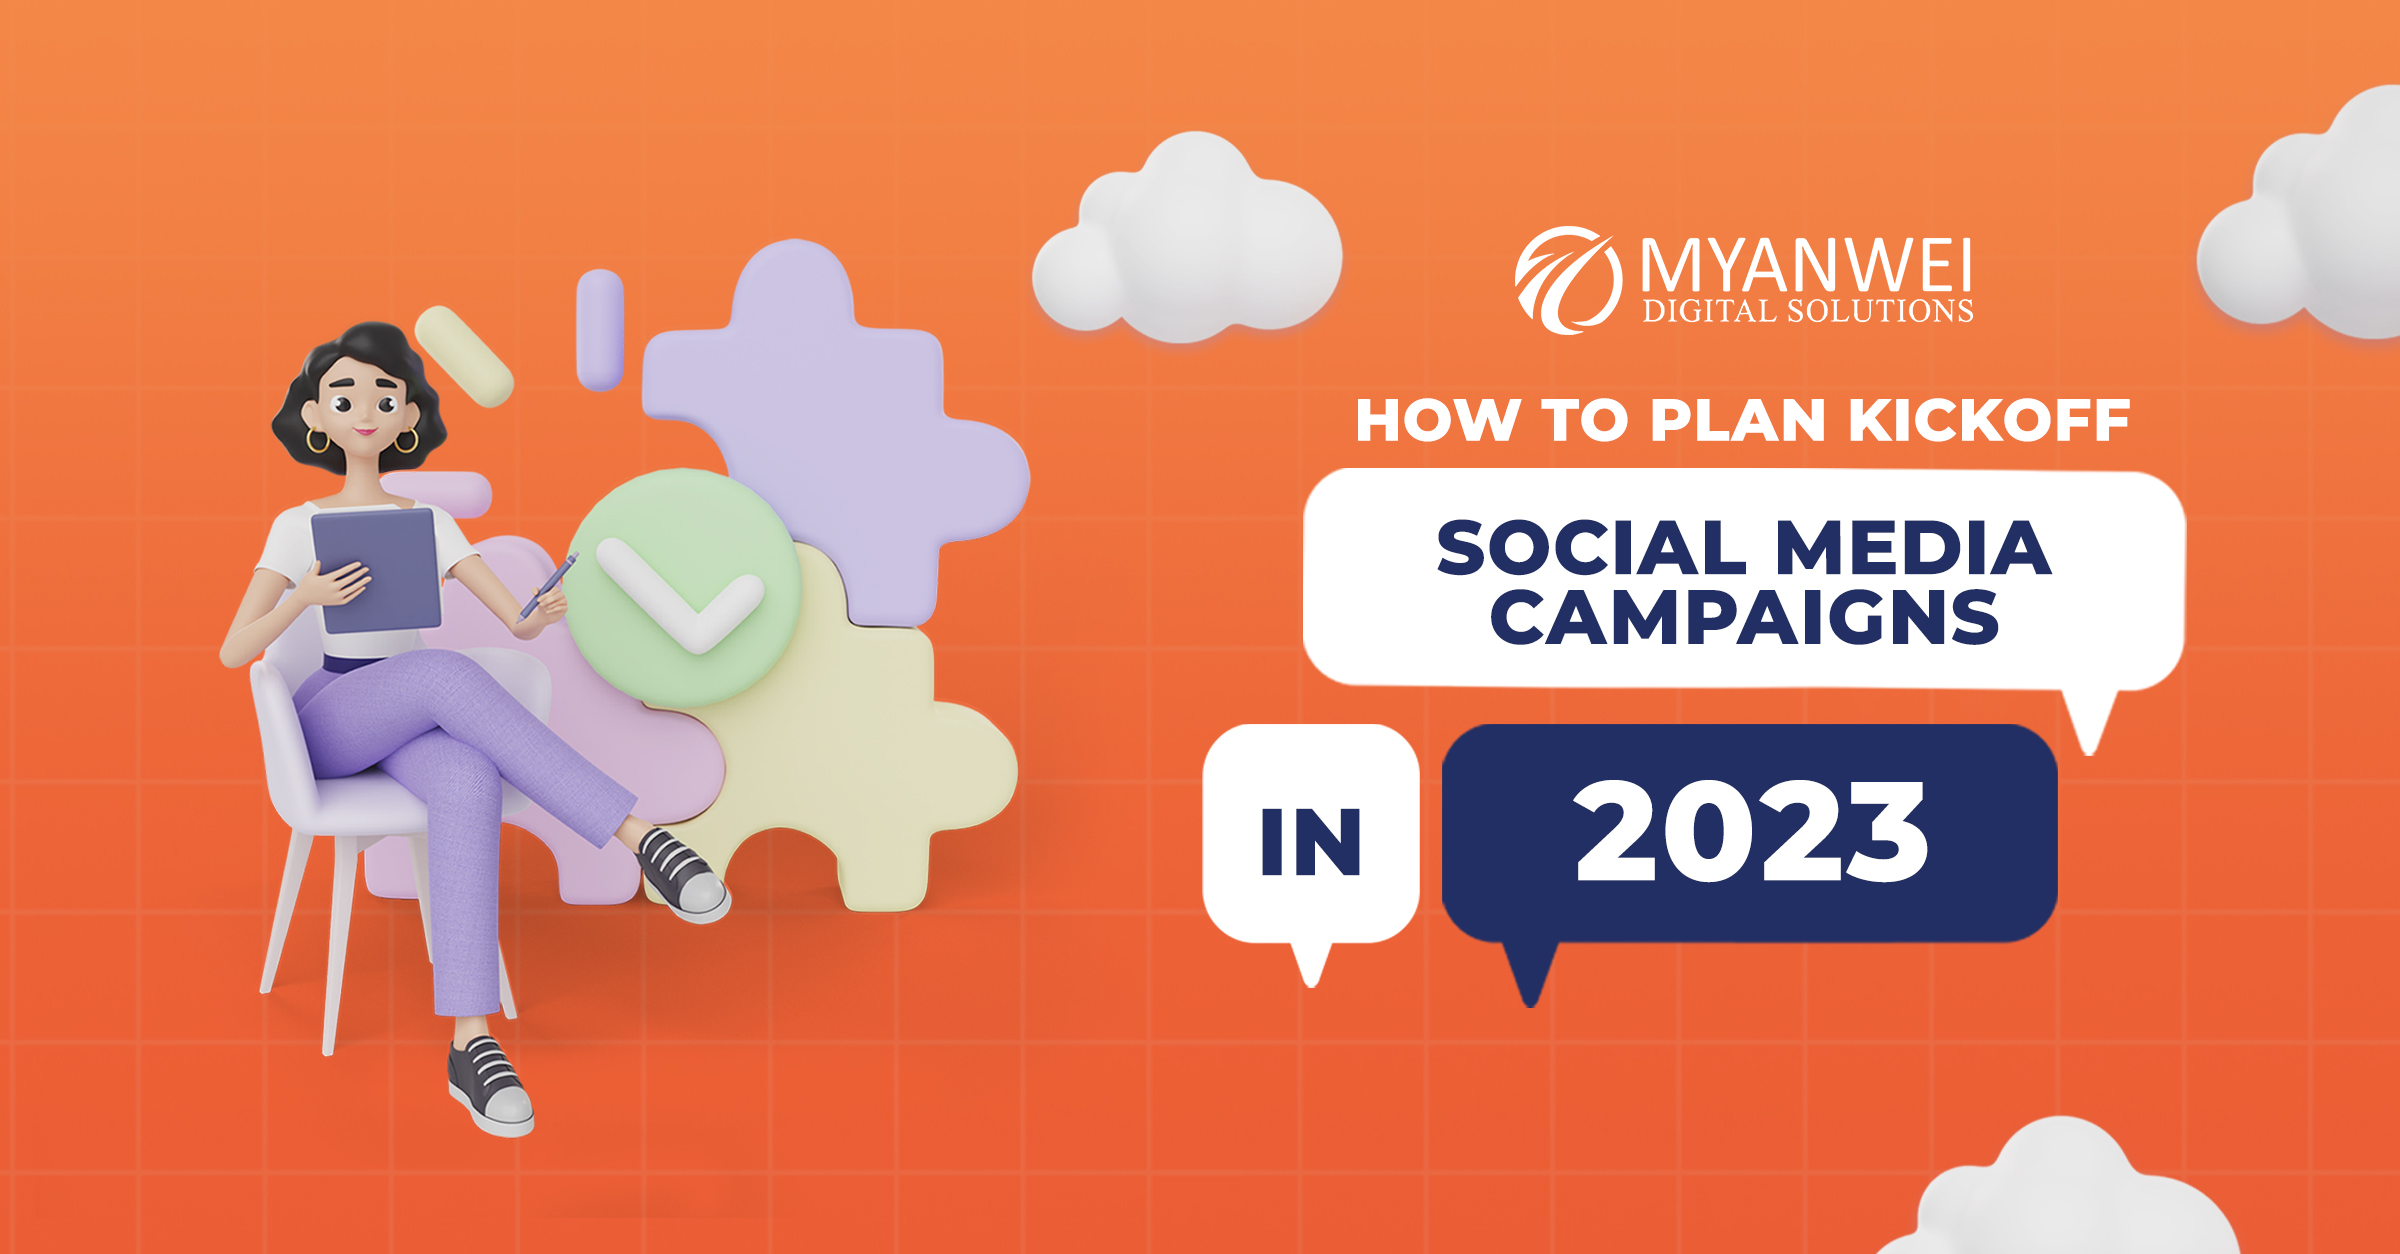 How to plan kickoff social media campaigns in 2023